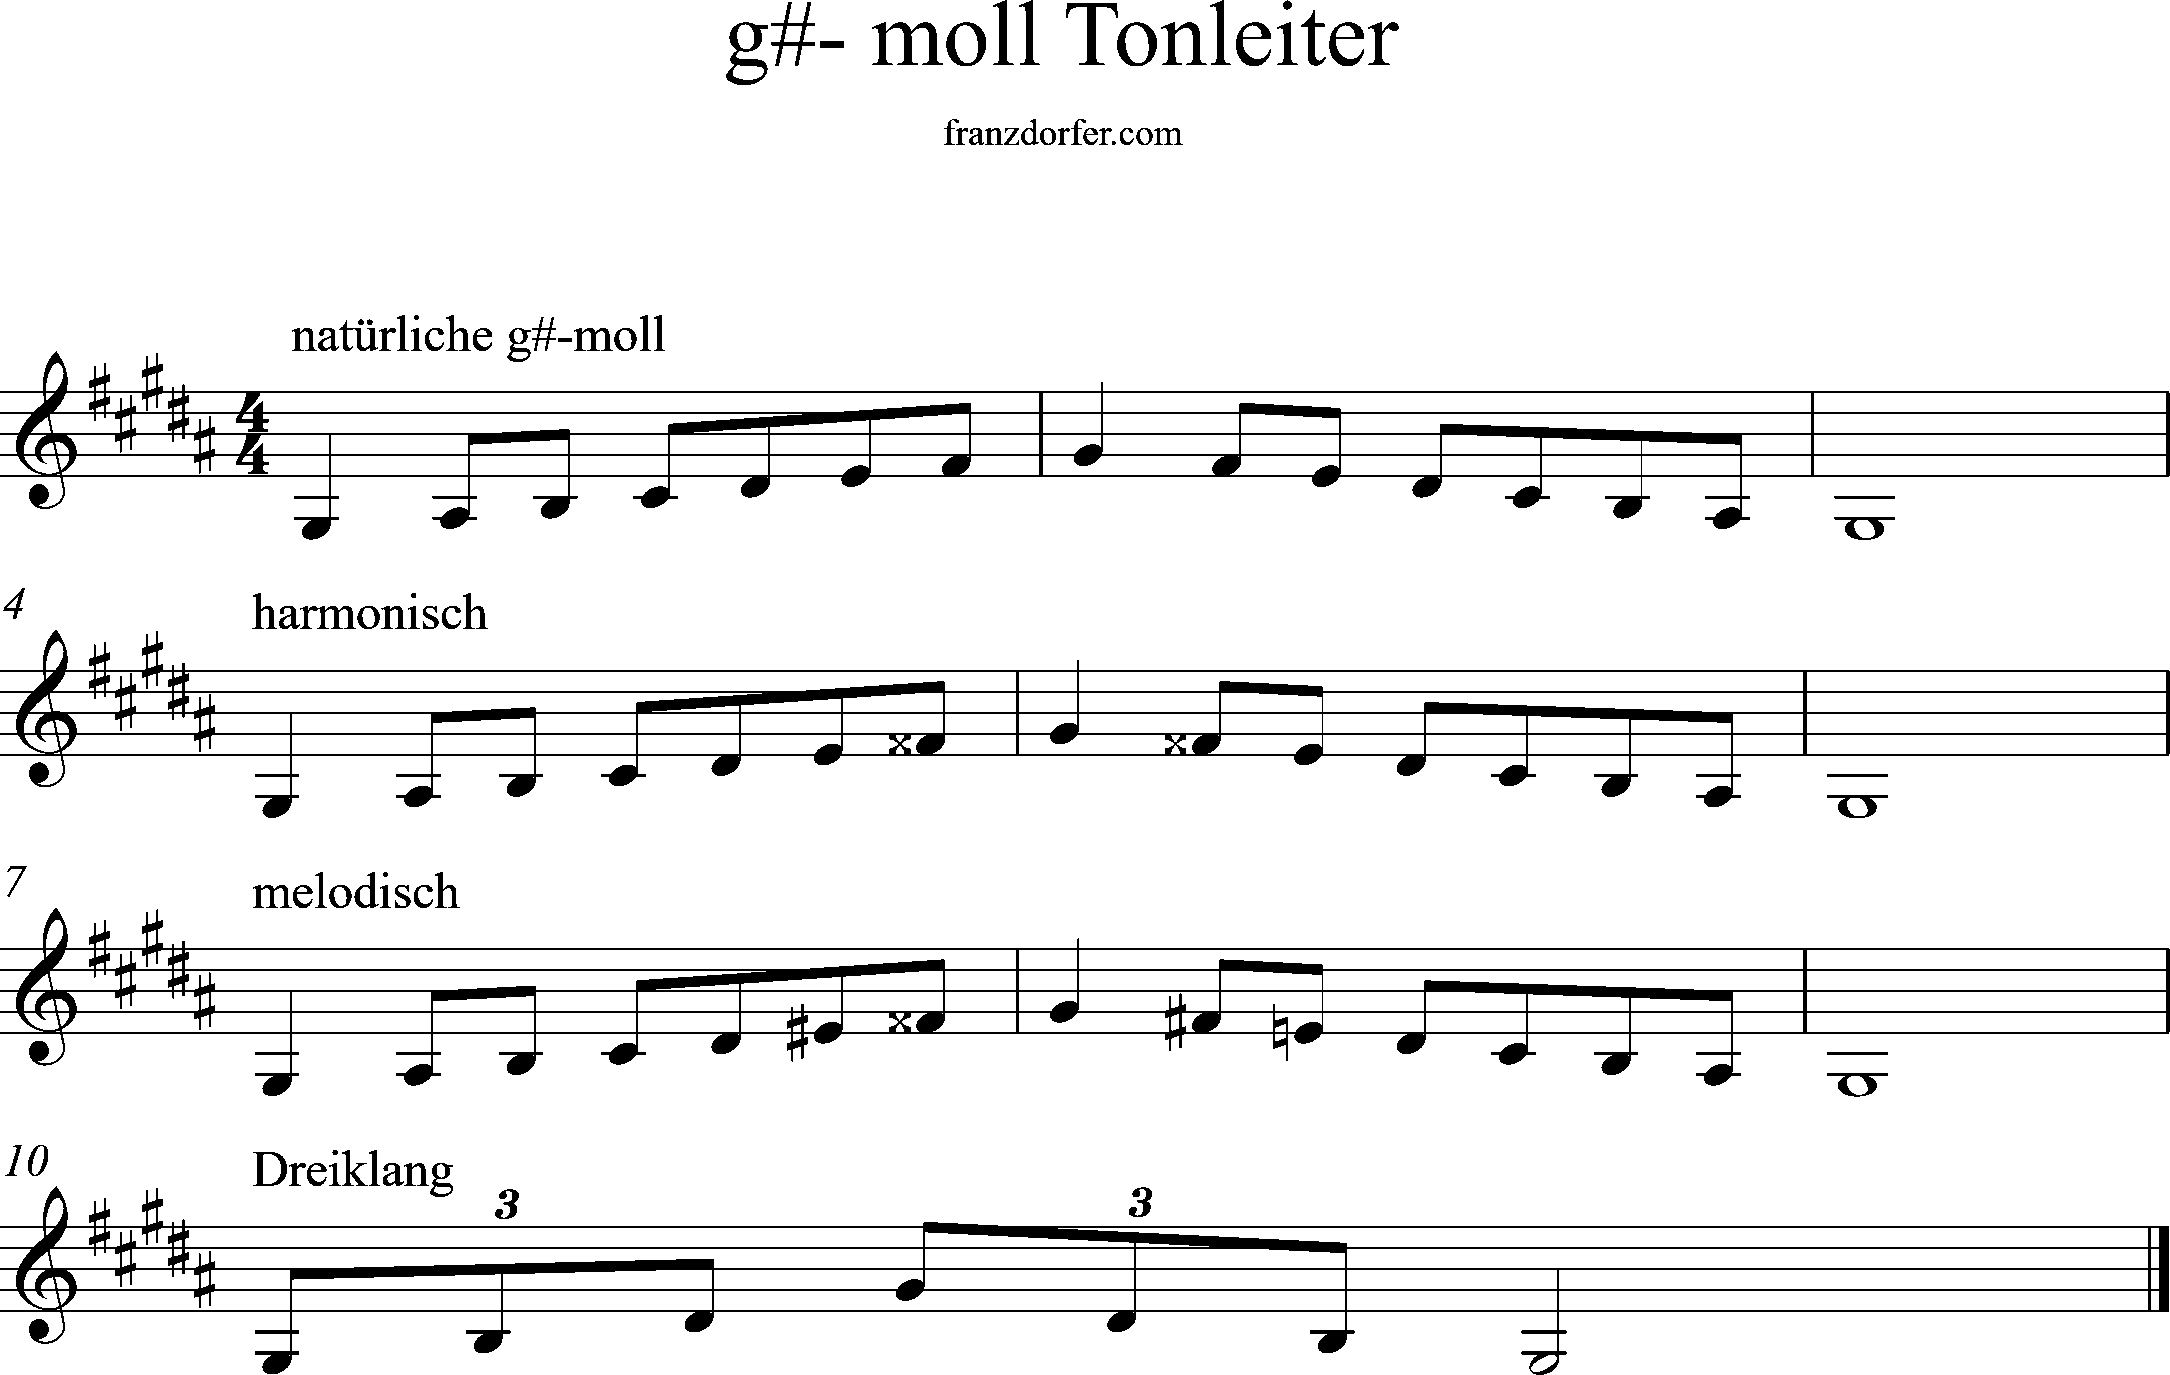 g#-minor, scale, lower octave